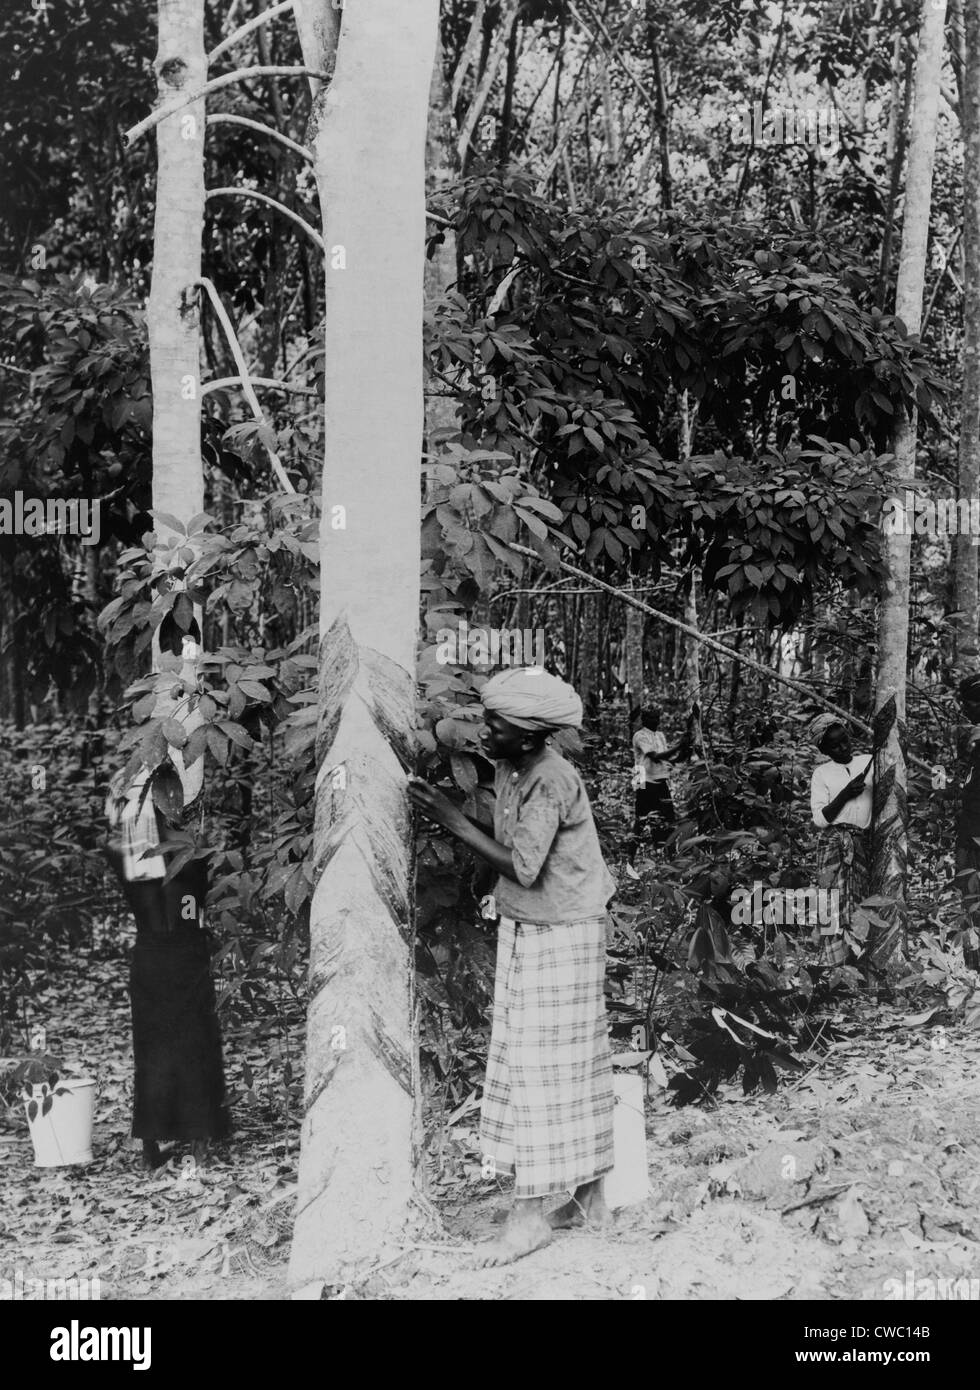 Gathering rubber sap. The rubber plants responds to cutting with a protective secretion of latex, which hardens into gum Stock Photo